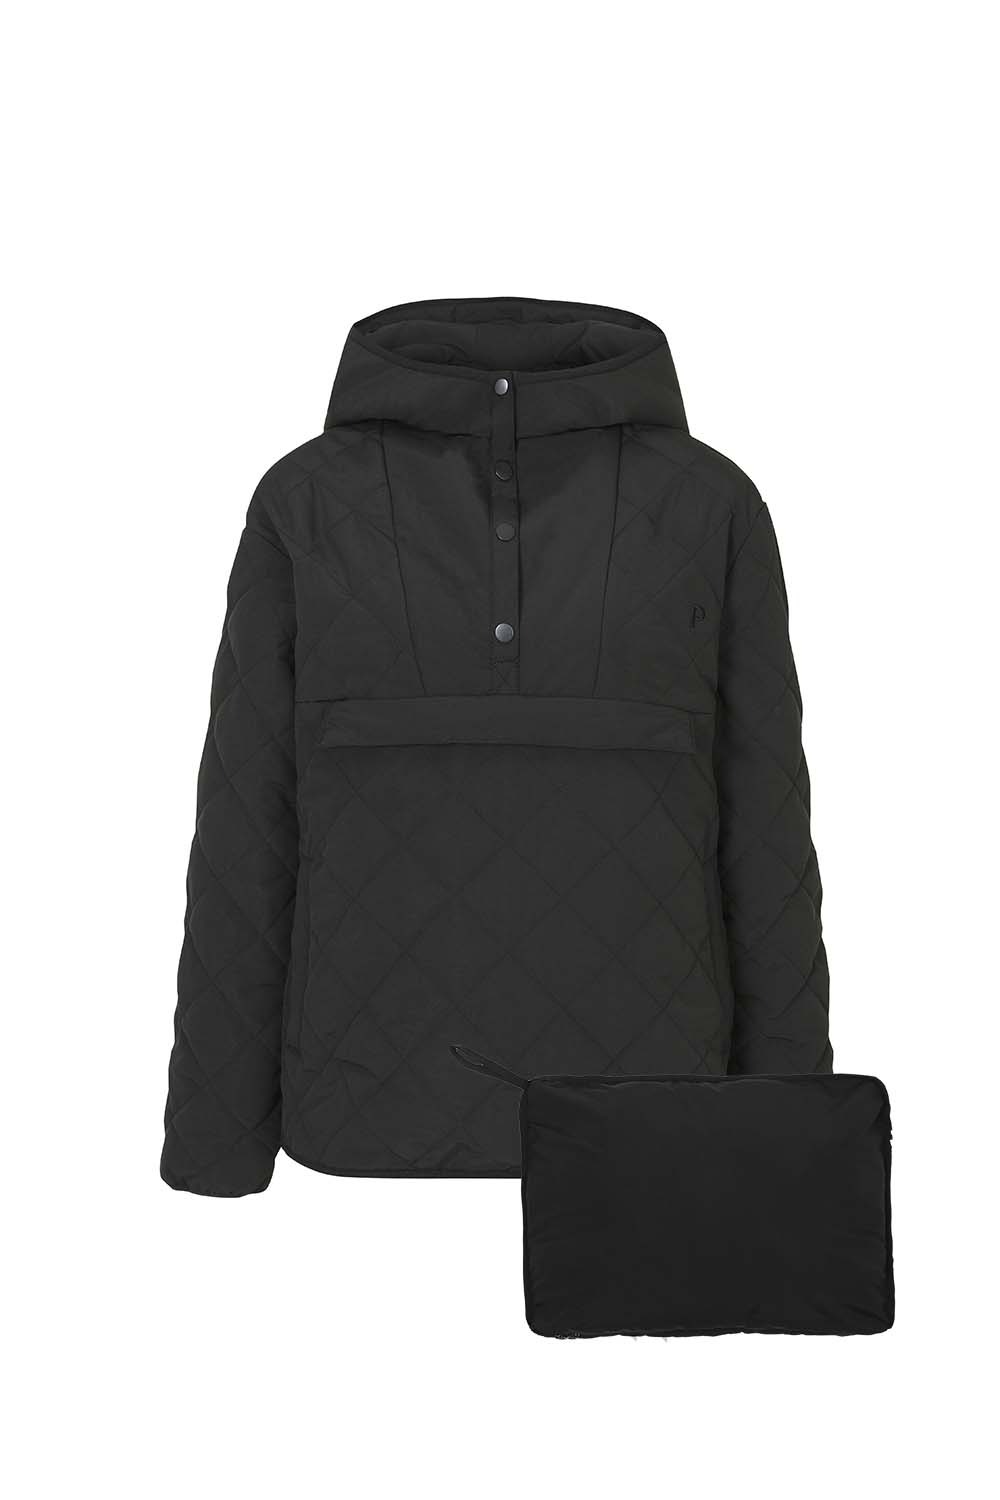 3M THINSULATE PACKABLE PARKA_Black